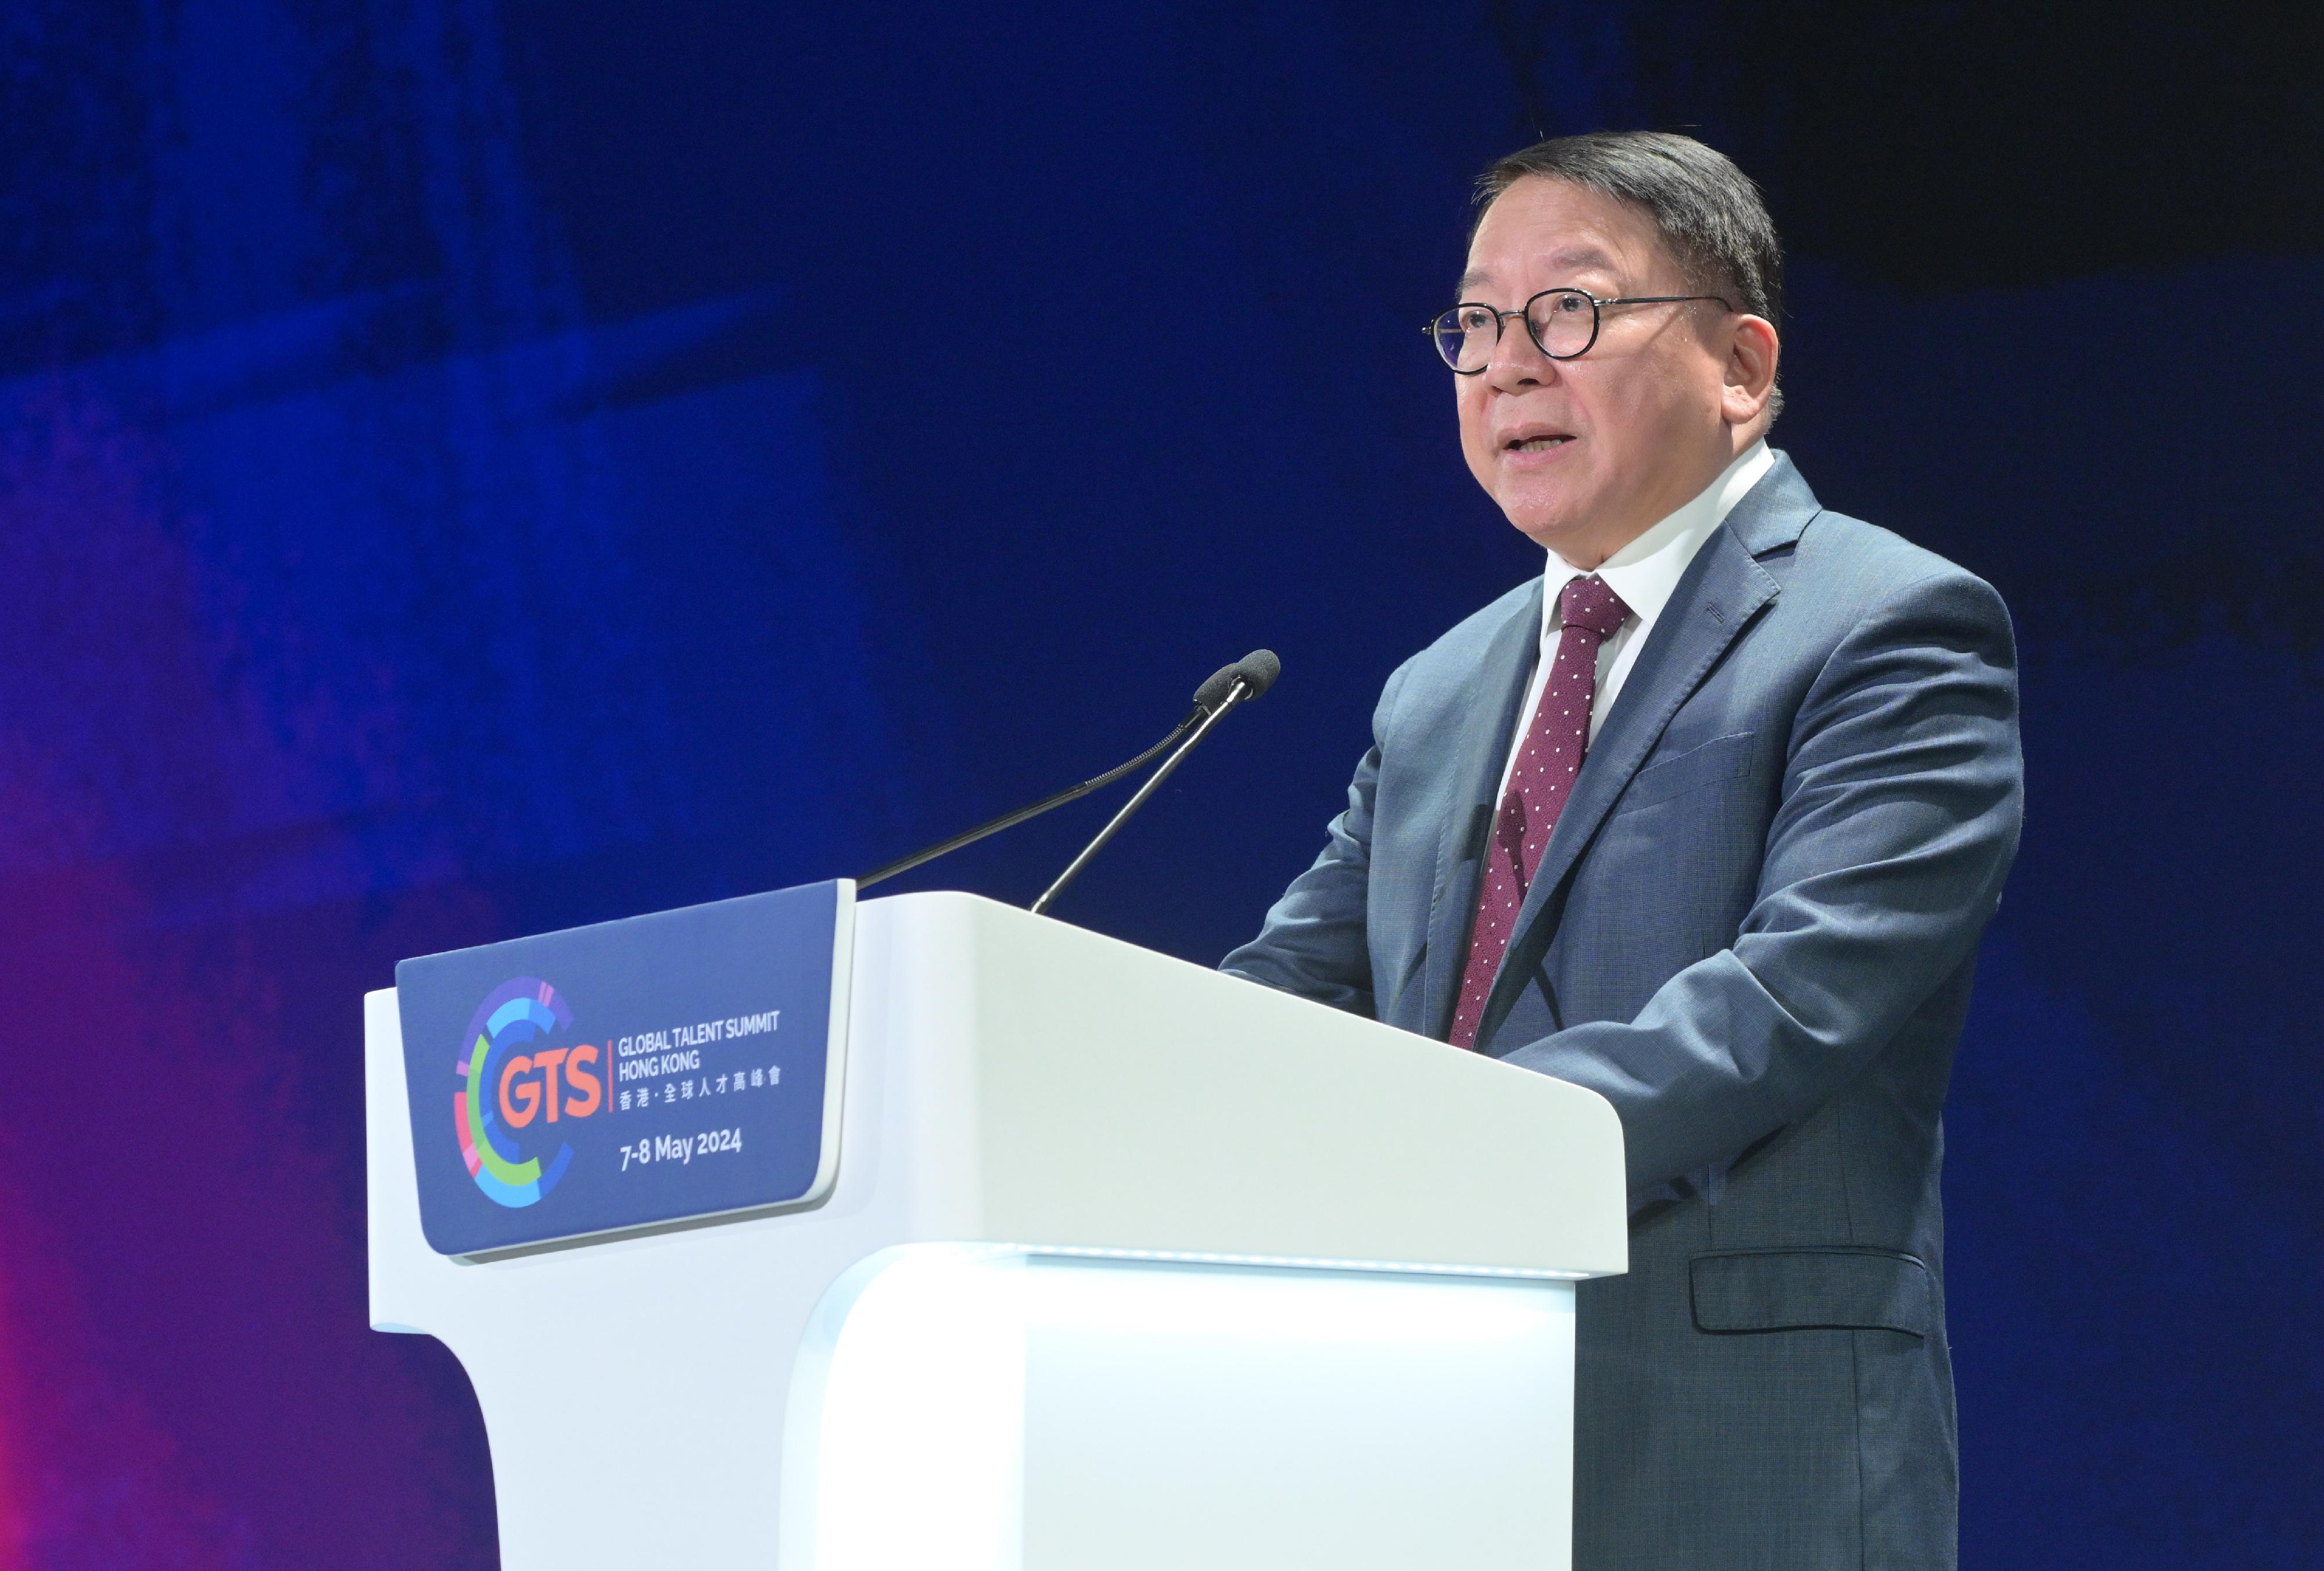 The Chief Secretary for Administration, Mr Chan Kwok-ki, today (May 8) attended the Second Guangdong-Hong Kong-Macao Greater Bay Area High-quality Talent Development Conference. Photo shows Mr Chan delivering his welcome remarks at the Conference.